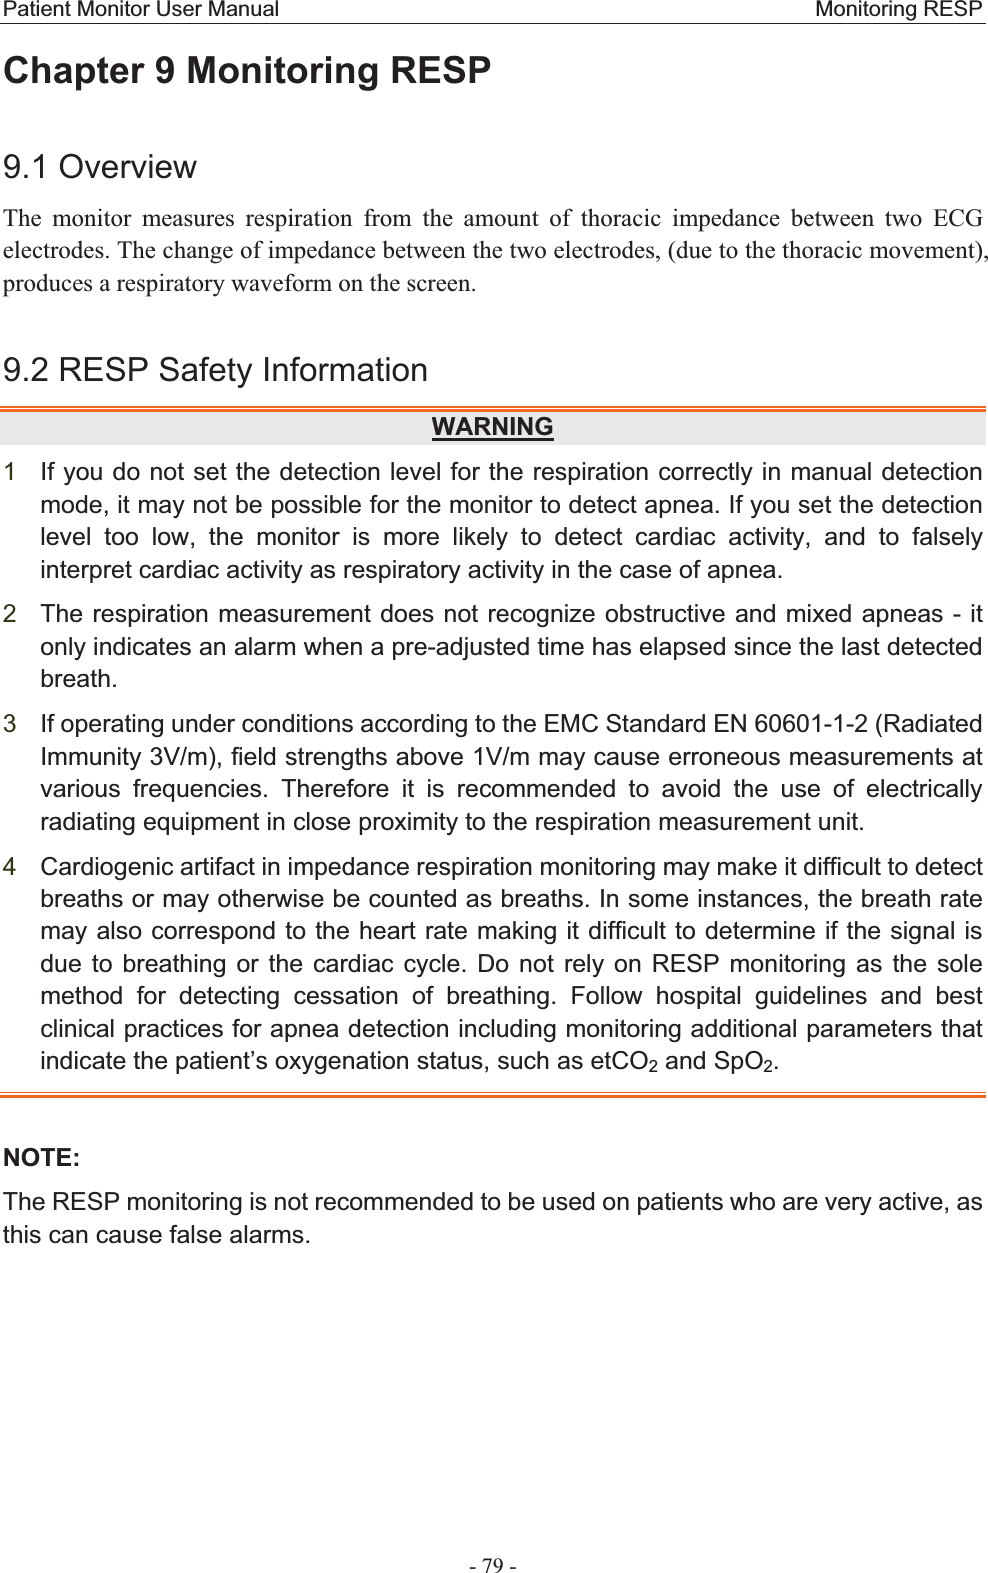 Patient Monitor User Manual                                                 Monitoring RESP  - 79 - Chapter 9 Monitoring RESP 9.1 OverviewThe monitor measures respiration from the amount of thoracic impedance between two ECG electrodes. The change of impedance between the two electrodes, (due to the thoracic movement), produces a respiratory waveform on the screen. 9.2 RESP Safety InformationWARNING1If you do not set the detection level for the respiration correctly in manual detection mode, it may not be possible for the monitor to detect apnea. If you set the detection level too low, the monitor is more likely to detect cardiac activity, and to falsely interpret cardiac activity as respiratory activity in the case of apnea. 2The respiration measurement does not recognize obstructive and mixed apneas - it only indicates an alarm when a pre-adjusted time has elapsed since the last detected breath.3If operating under conditions according to the EMC Standard EN 60601-1-2 (Radiated Immunity 3V/m), field strengths above 1V/m may cause erroneous measurements at various frequencies. Therefore it is recommended to avoid the use of electrically radiating equipment in close proximity to the respiration measurement unit. 4Cardiogenic artifact in impedance respiration monitoring may make it difficult to detect breaths or may otherwise be counted as breaths. In some instances, the breath rate may also correspond to the heart rate making it difficult to determine if the signal is due to breathing or the cardiac cycle. Do not rely on RESP monitoring as the sole method for detecting cessation of breathing. Follow hospital guidelines and best clinical practices for apnea detection including monitoring additional parameters that indicate the patient’s oxygenation status, such as etCO2 and SpO2.NOTE:The RESP monitoring is not recommended to be used on patients who are very active, as this can cause false alarms. 